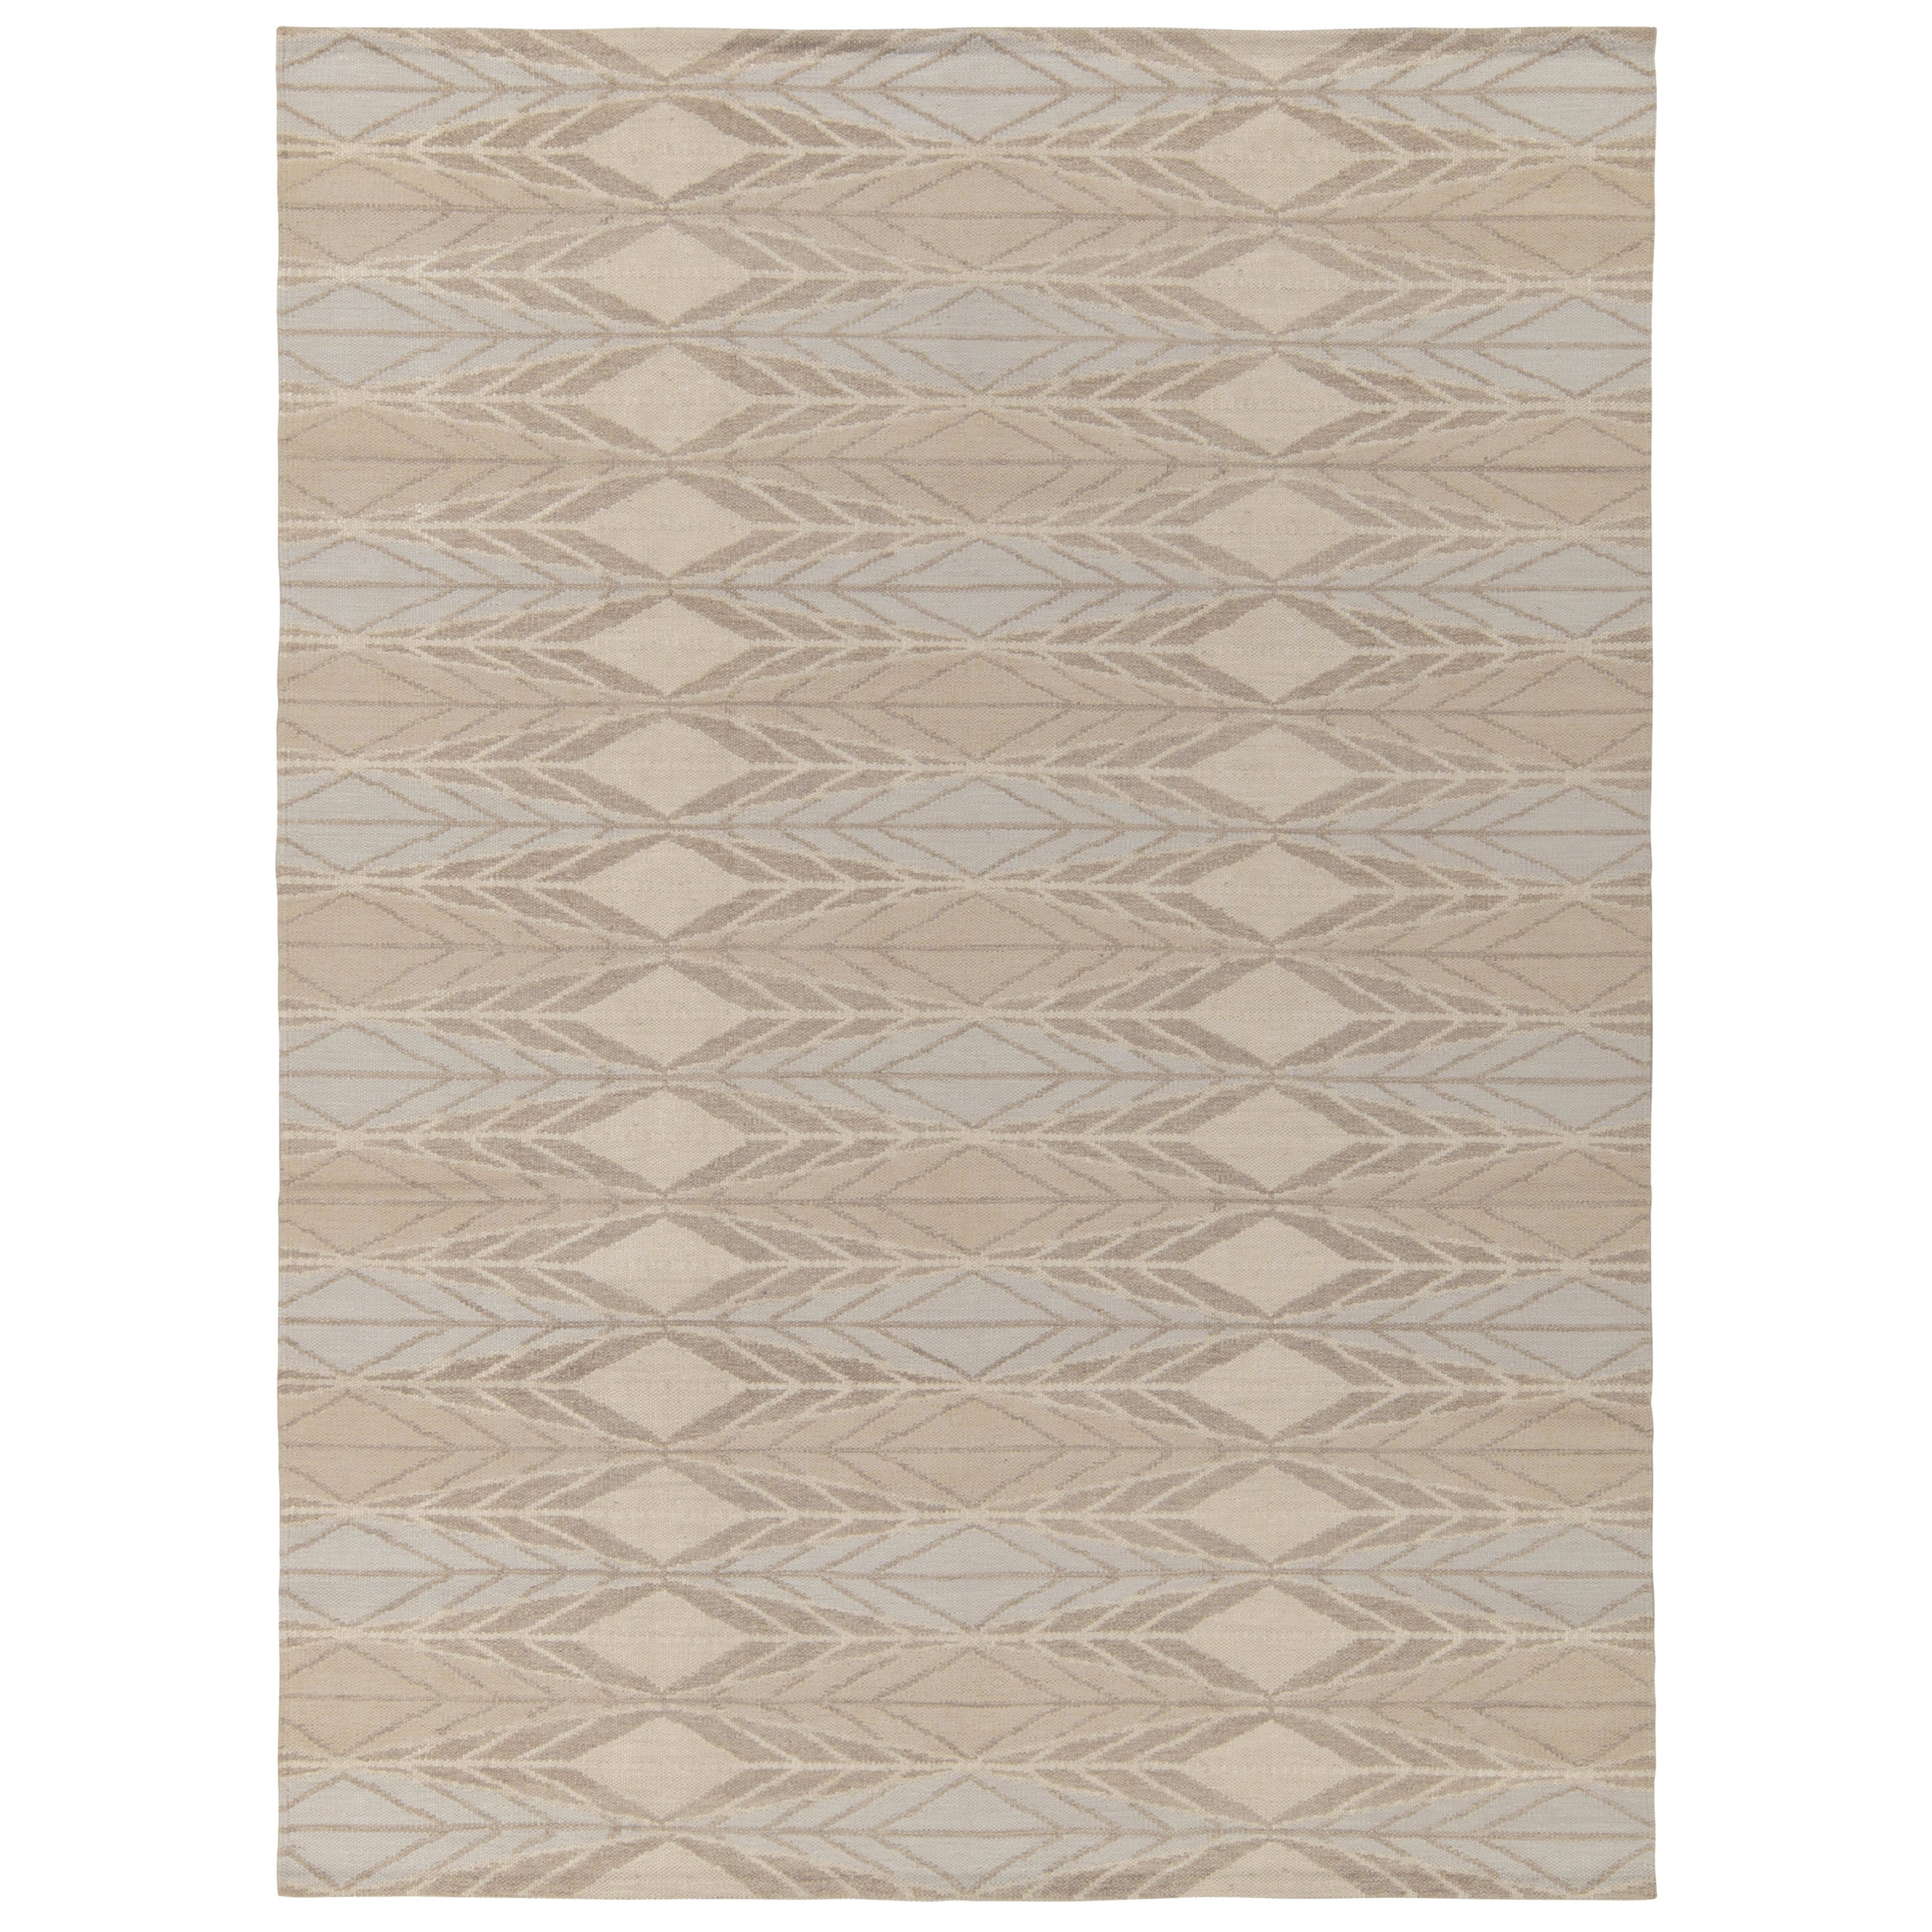 Rug & Kilim’s Scandinavian Style Kilim in Taupe, Blue and Off-White Patterns